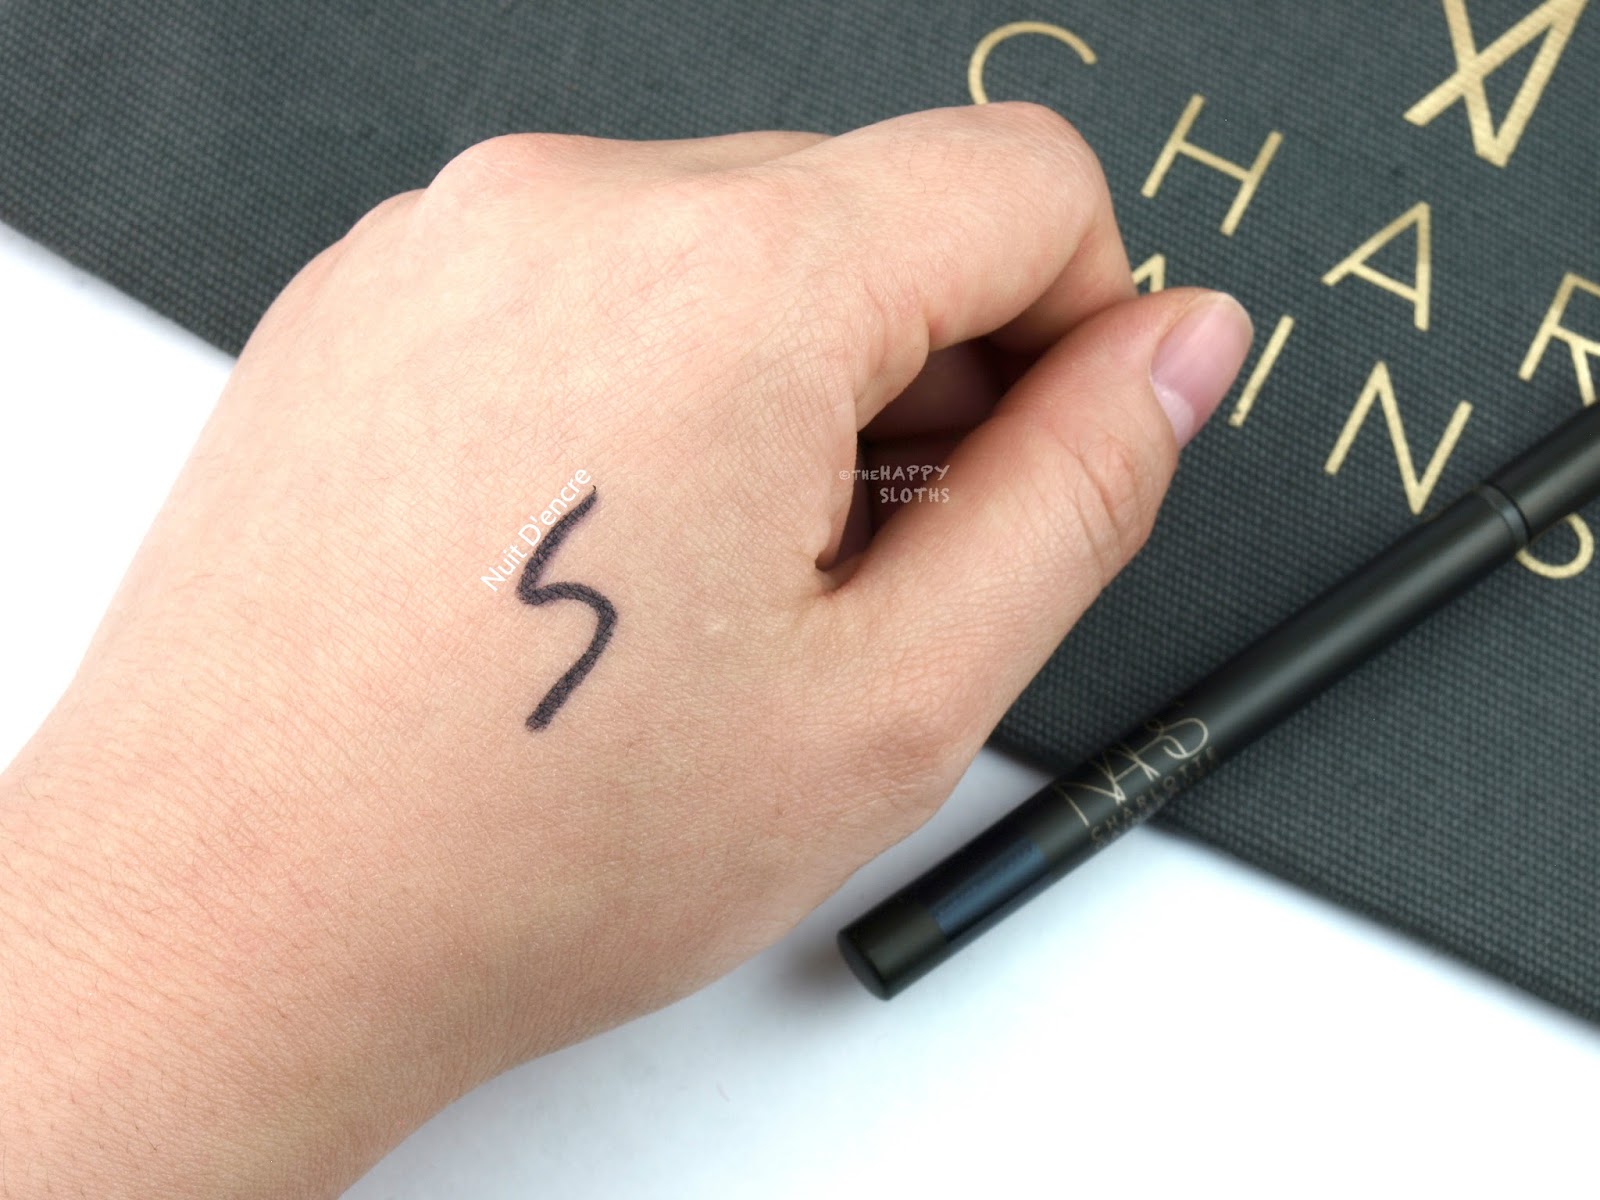 NARS x Charlotte Gainsbourg Kholiner in "Nuit D'encre": Review and Swatches